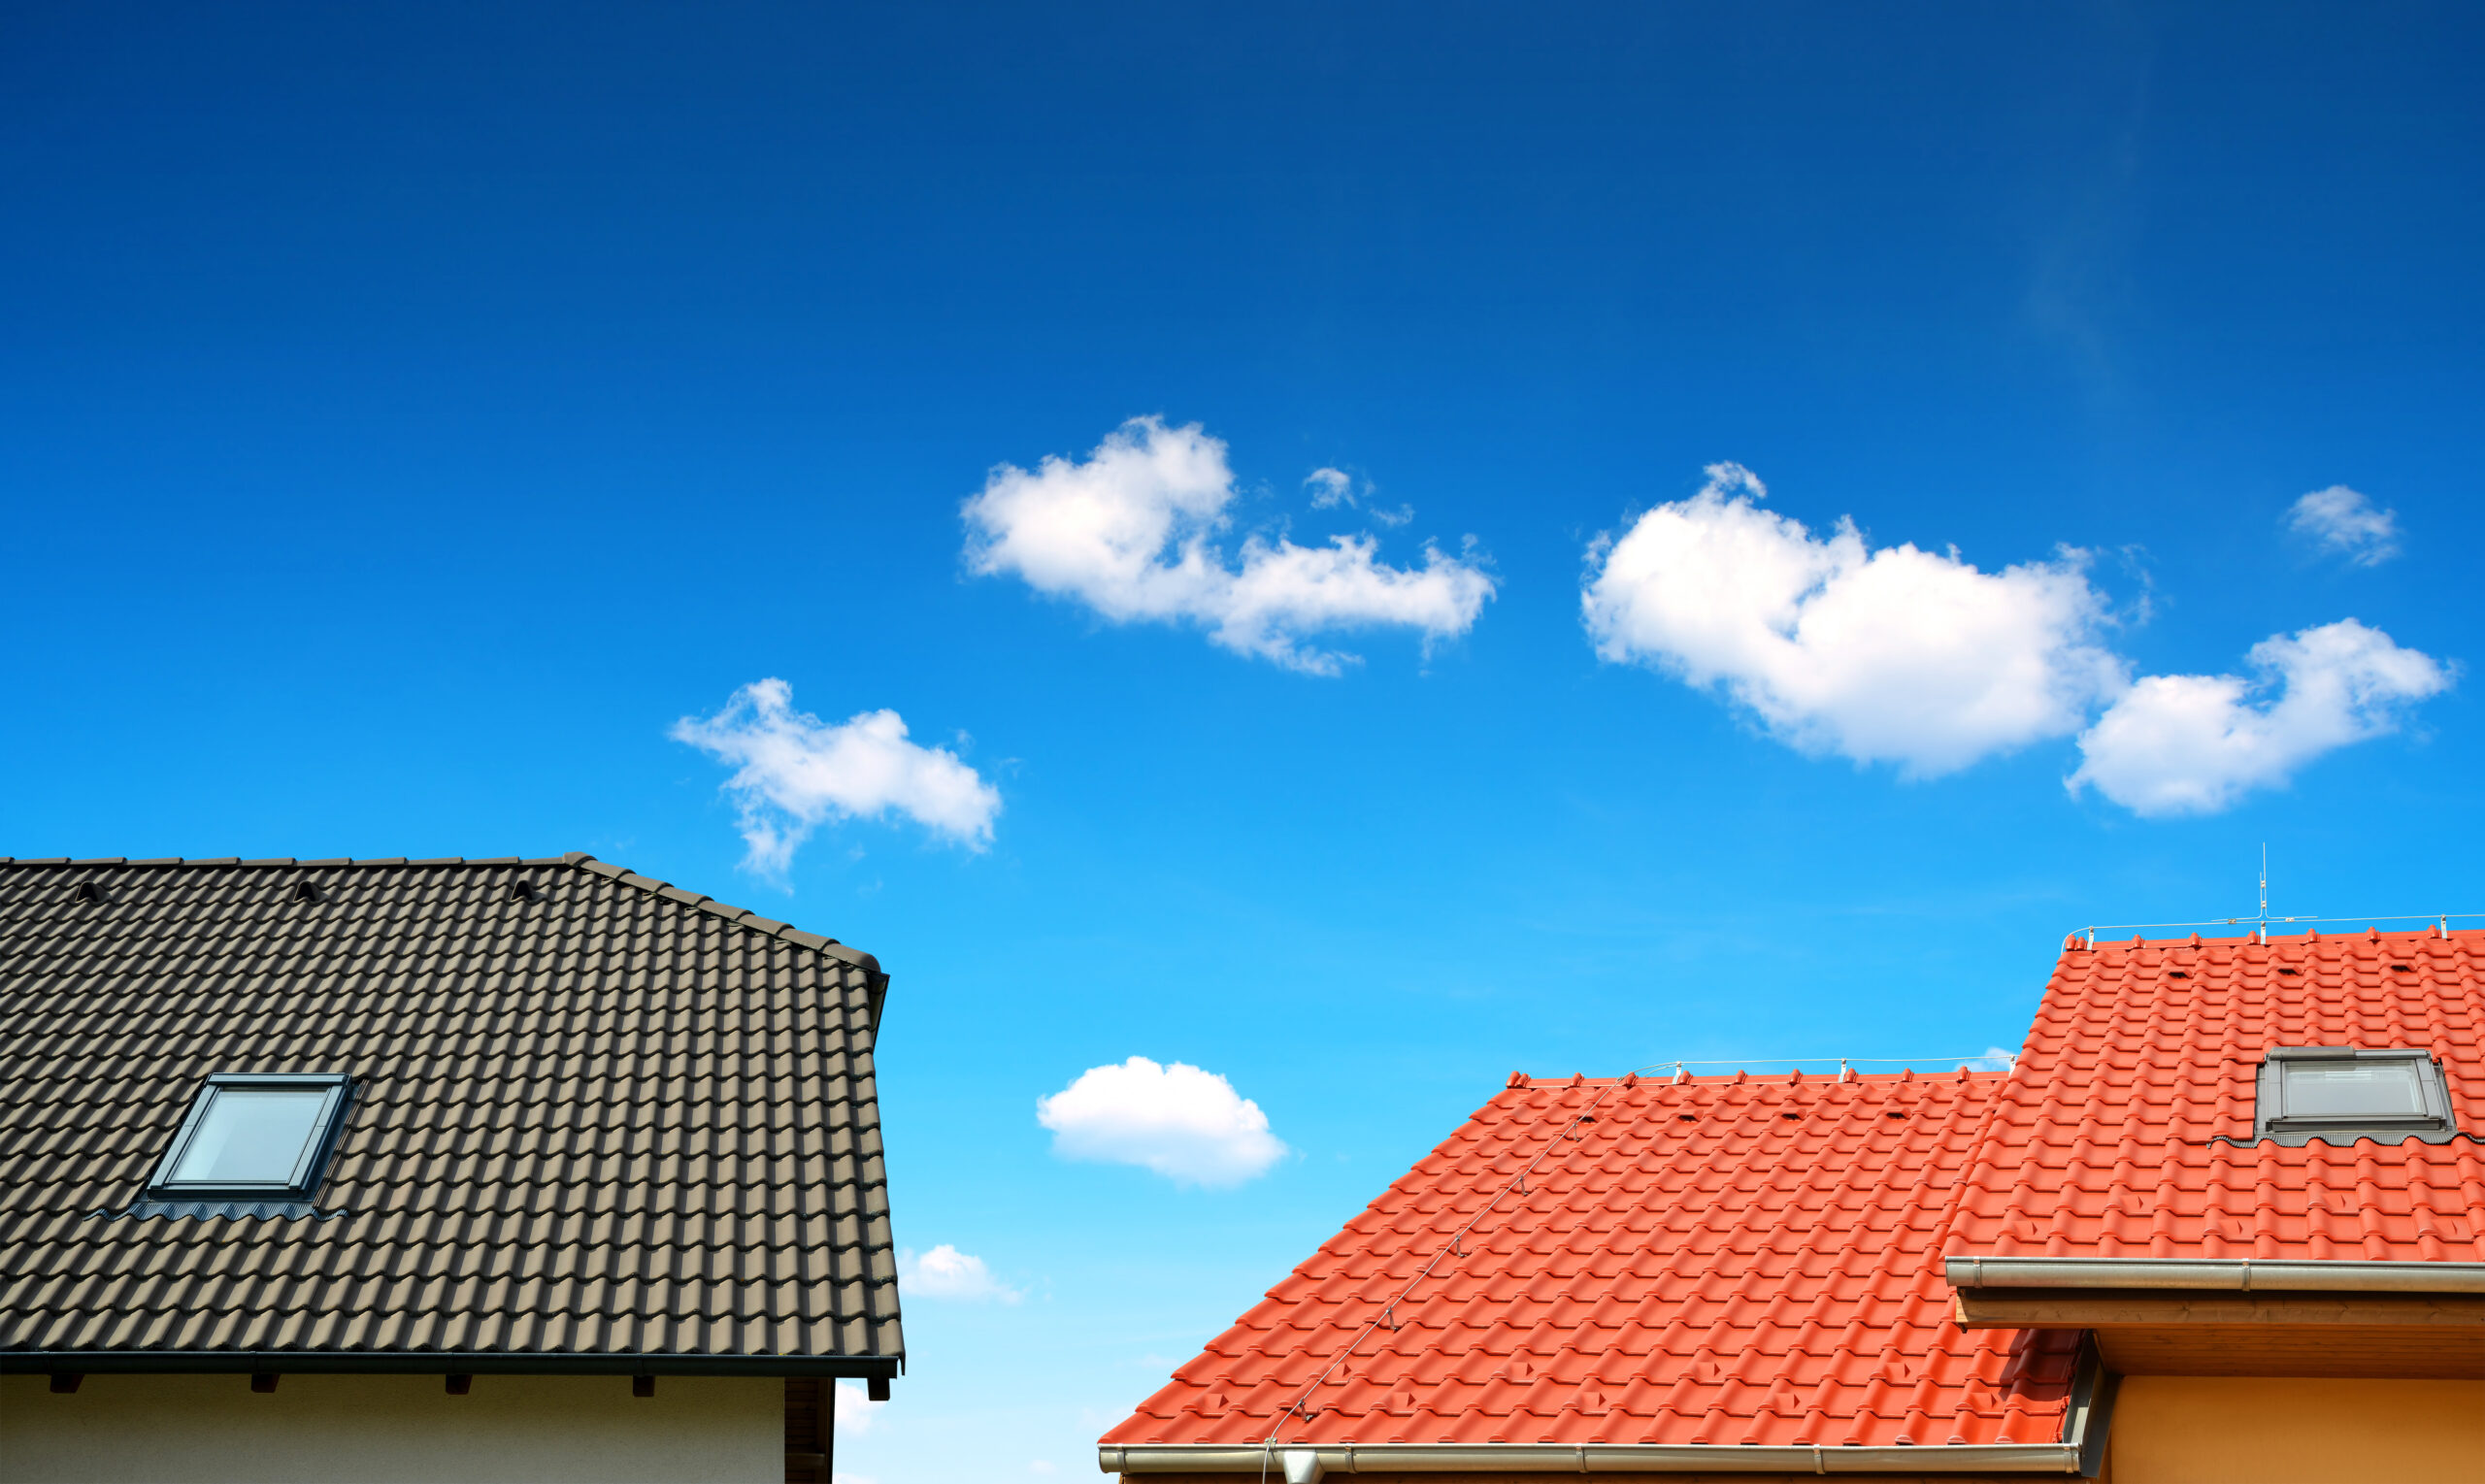 House with a dark brown roof on the left and a house with a red roof on the right, on a blue sky background